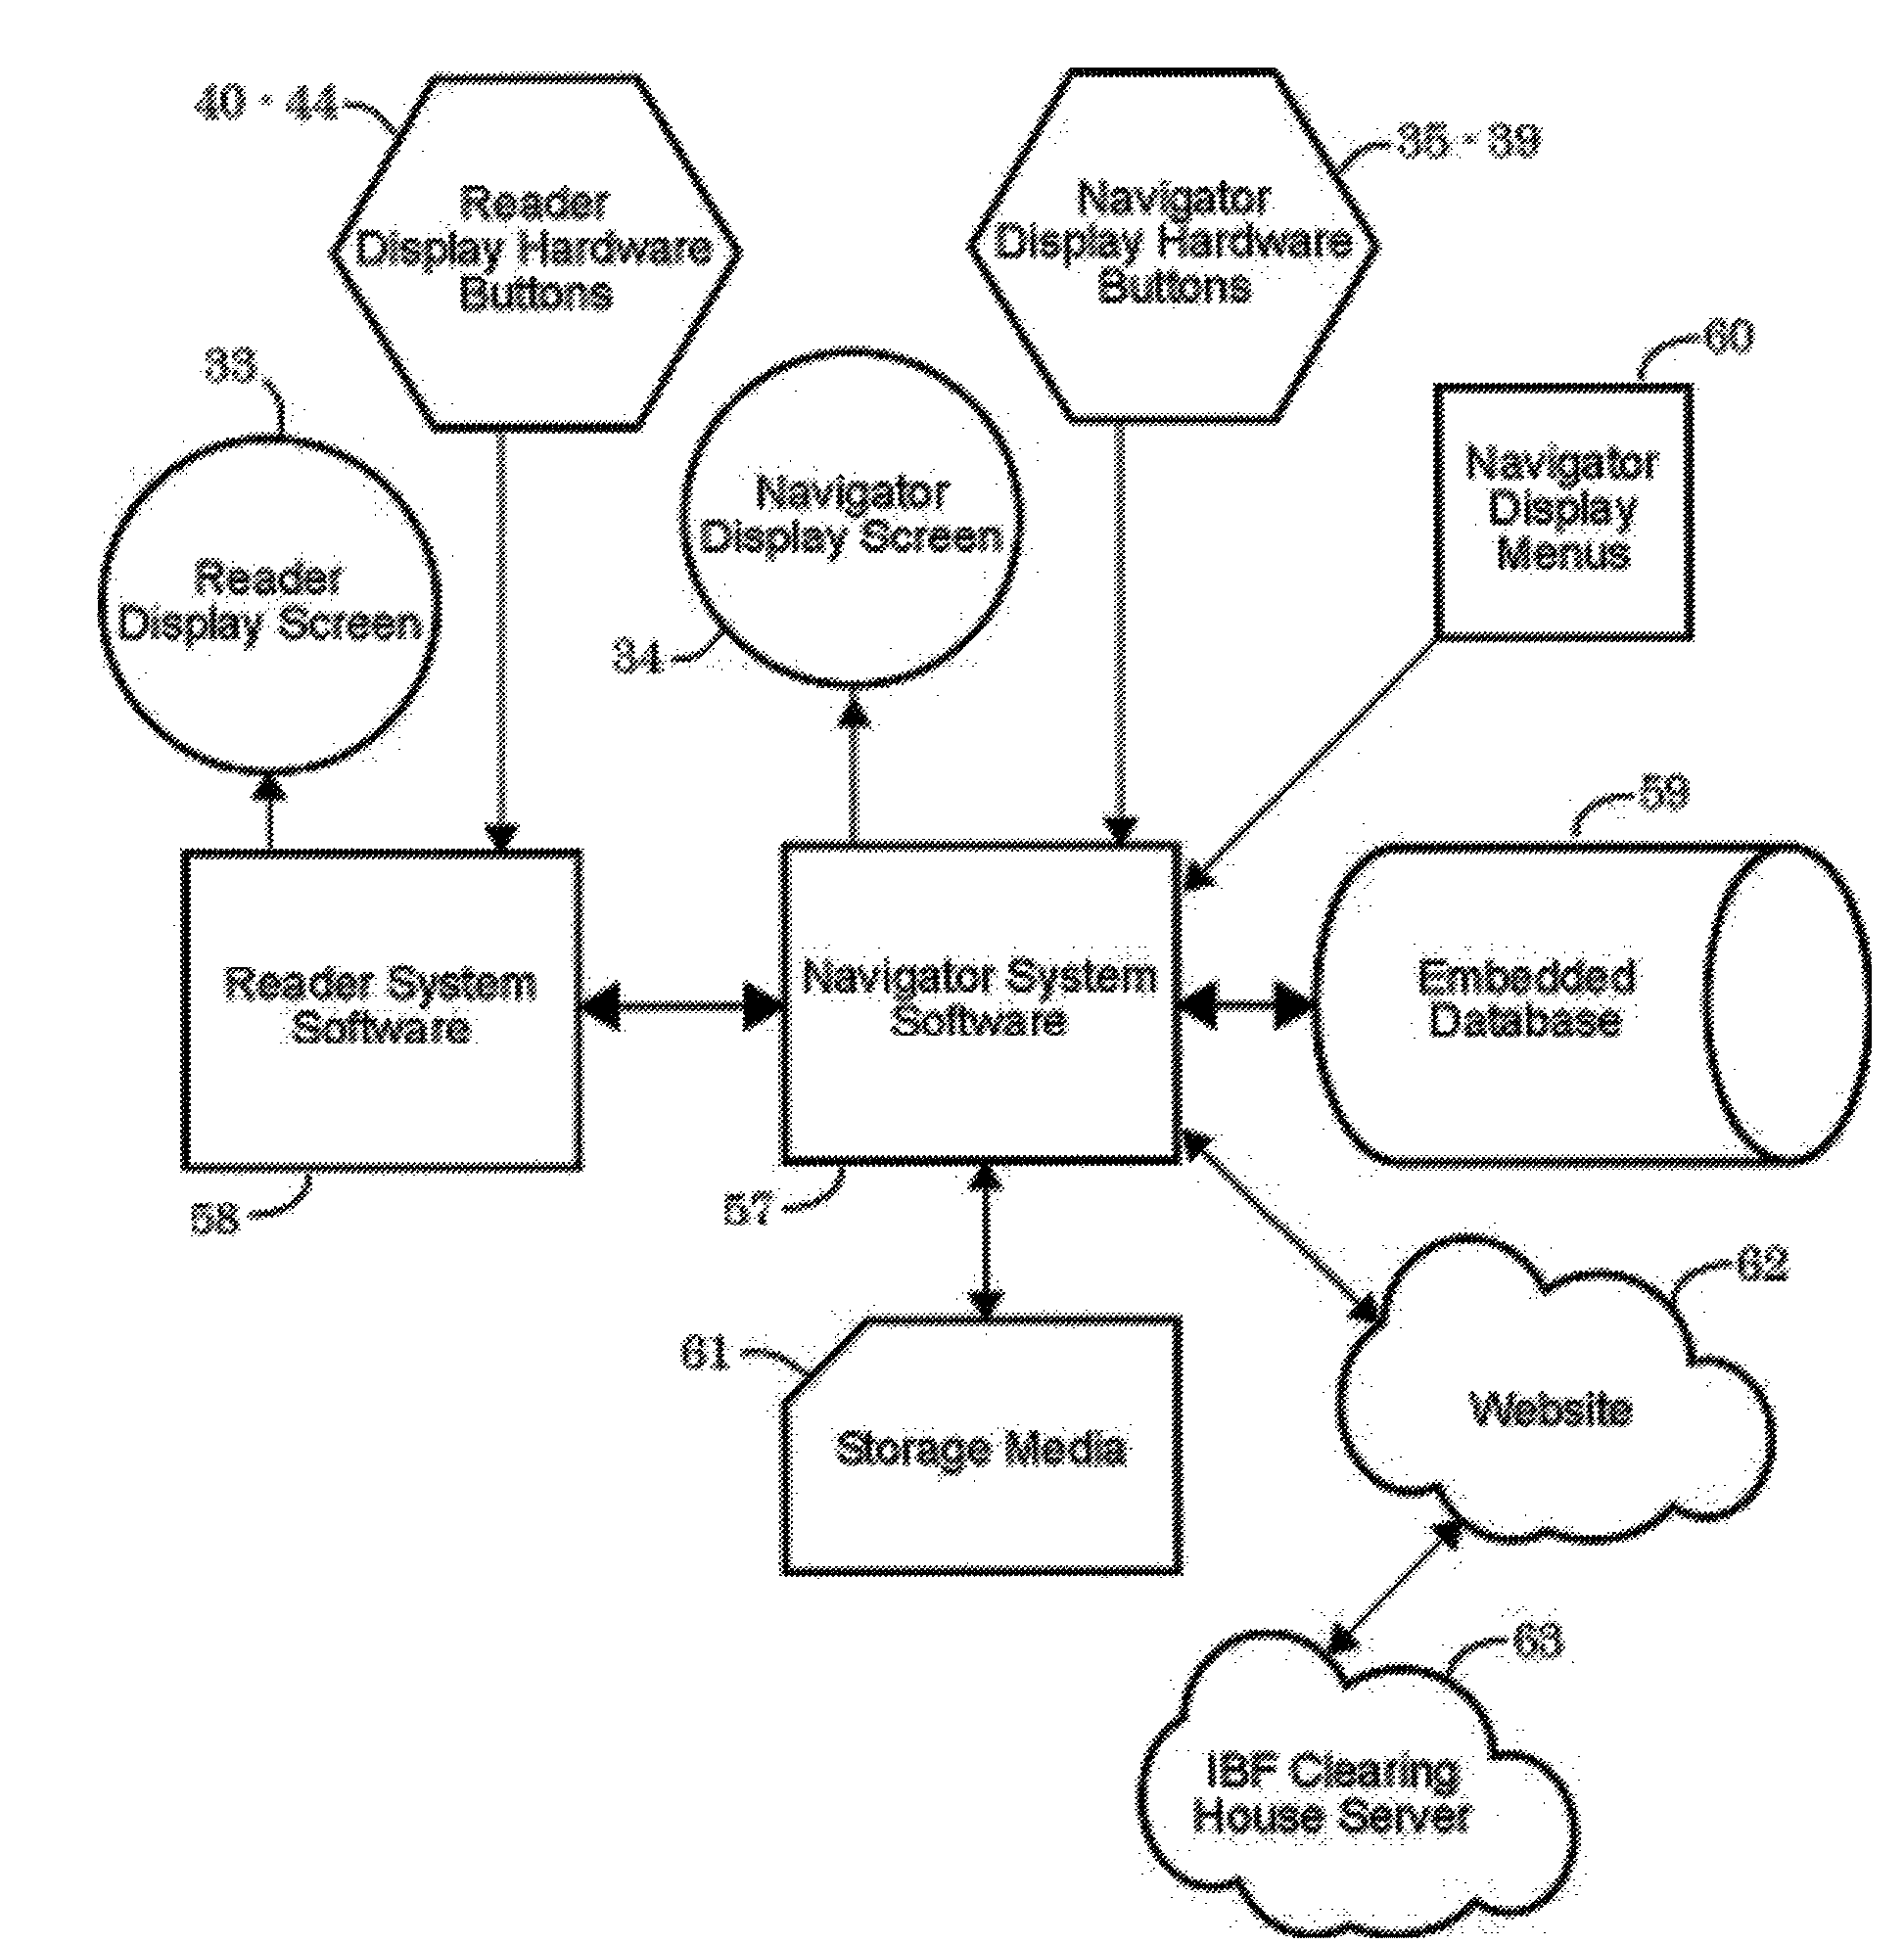 System and method for publishing, distributing, and reading electronic interactive books